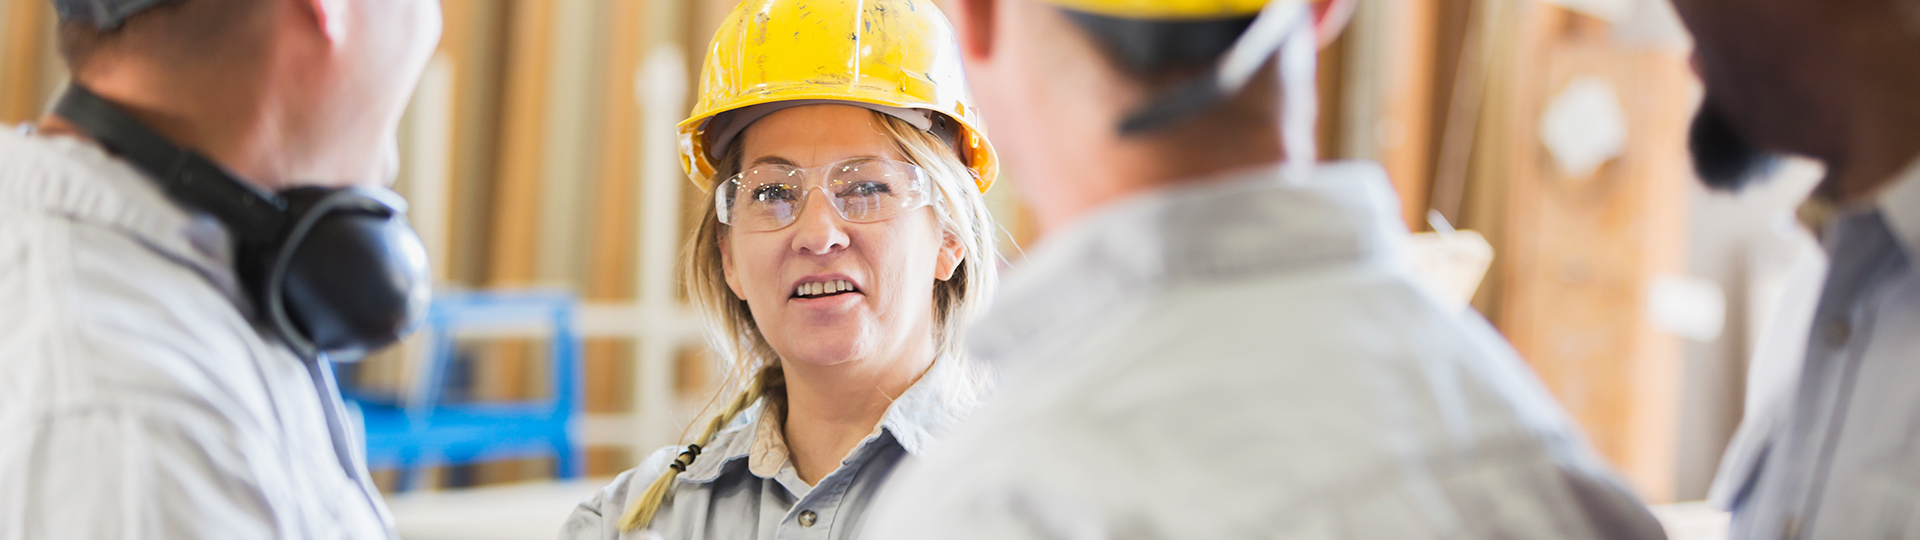 Female worker with hard hat speaking to others